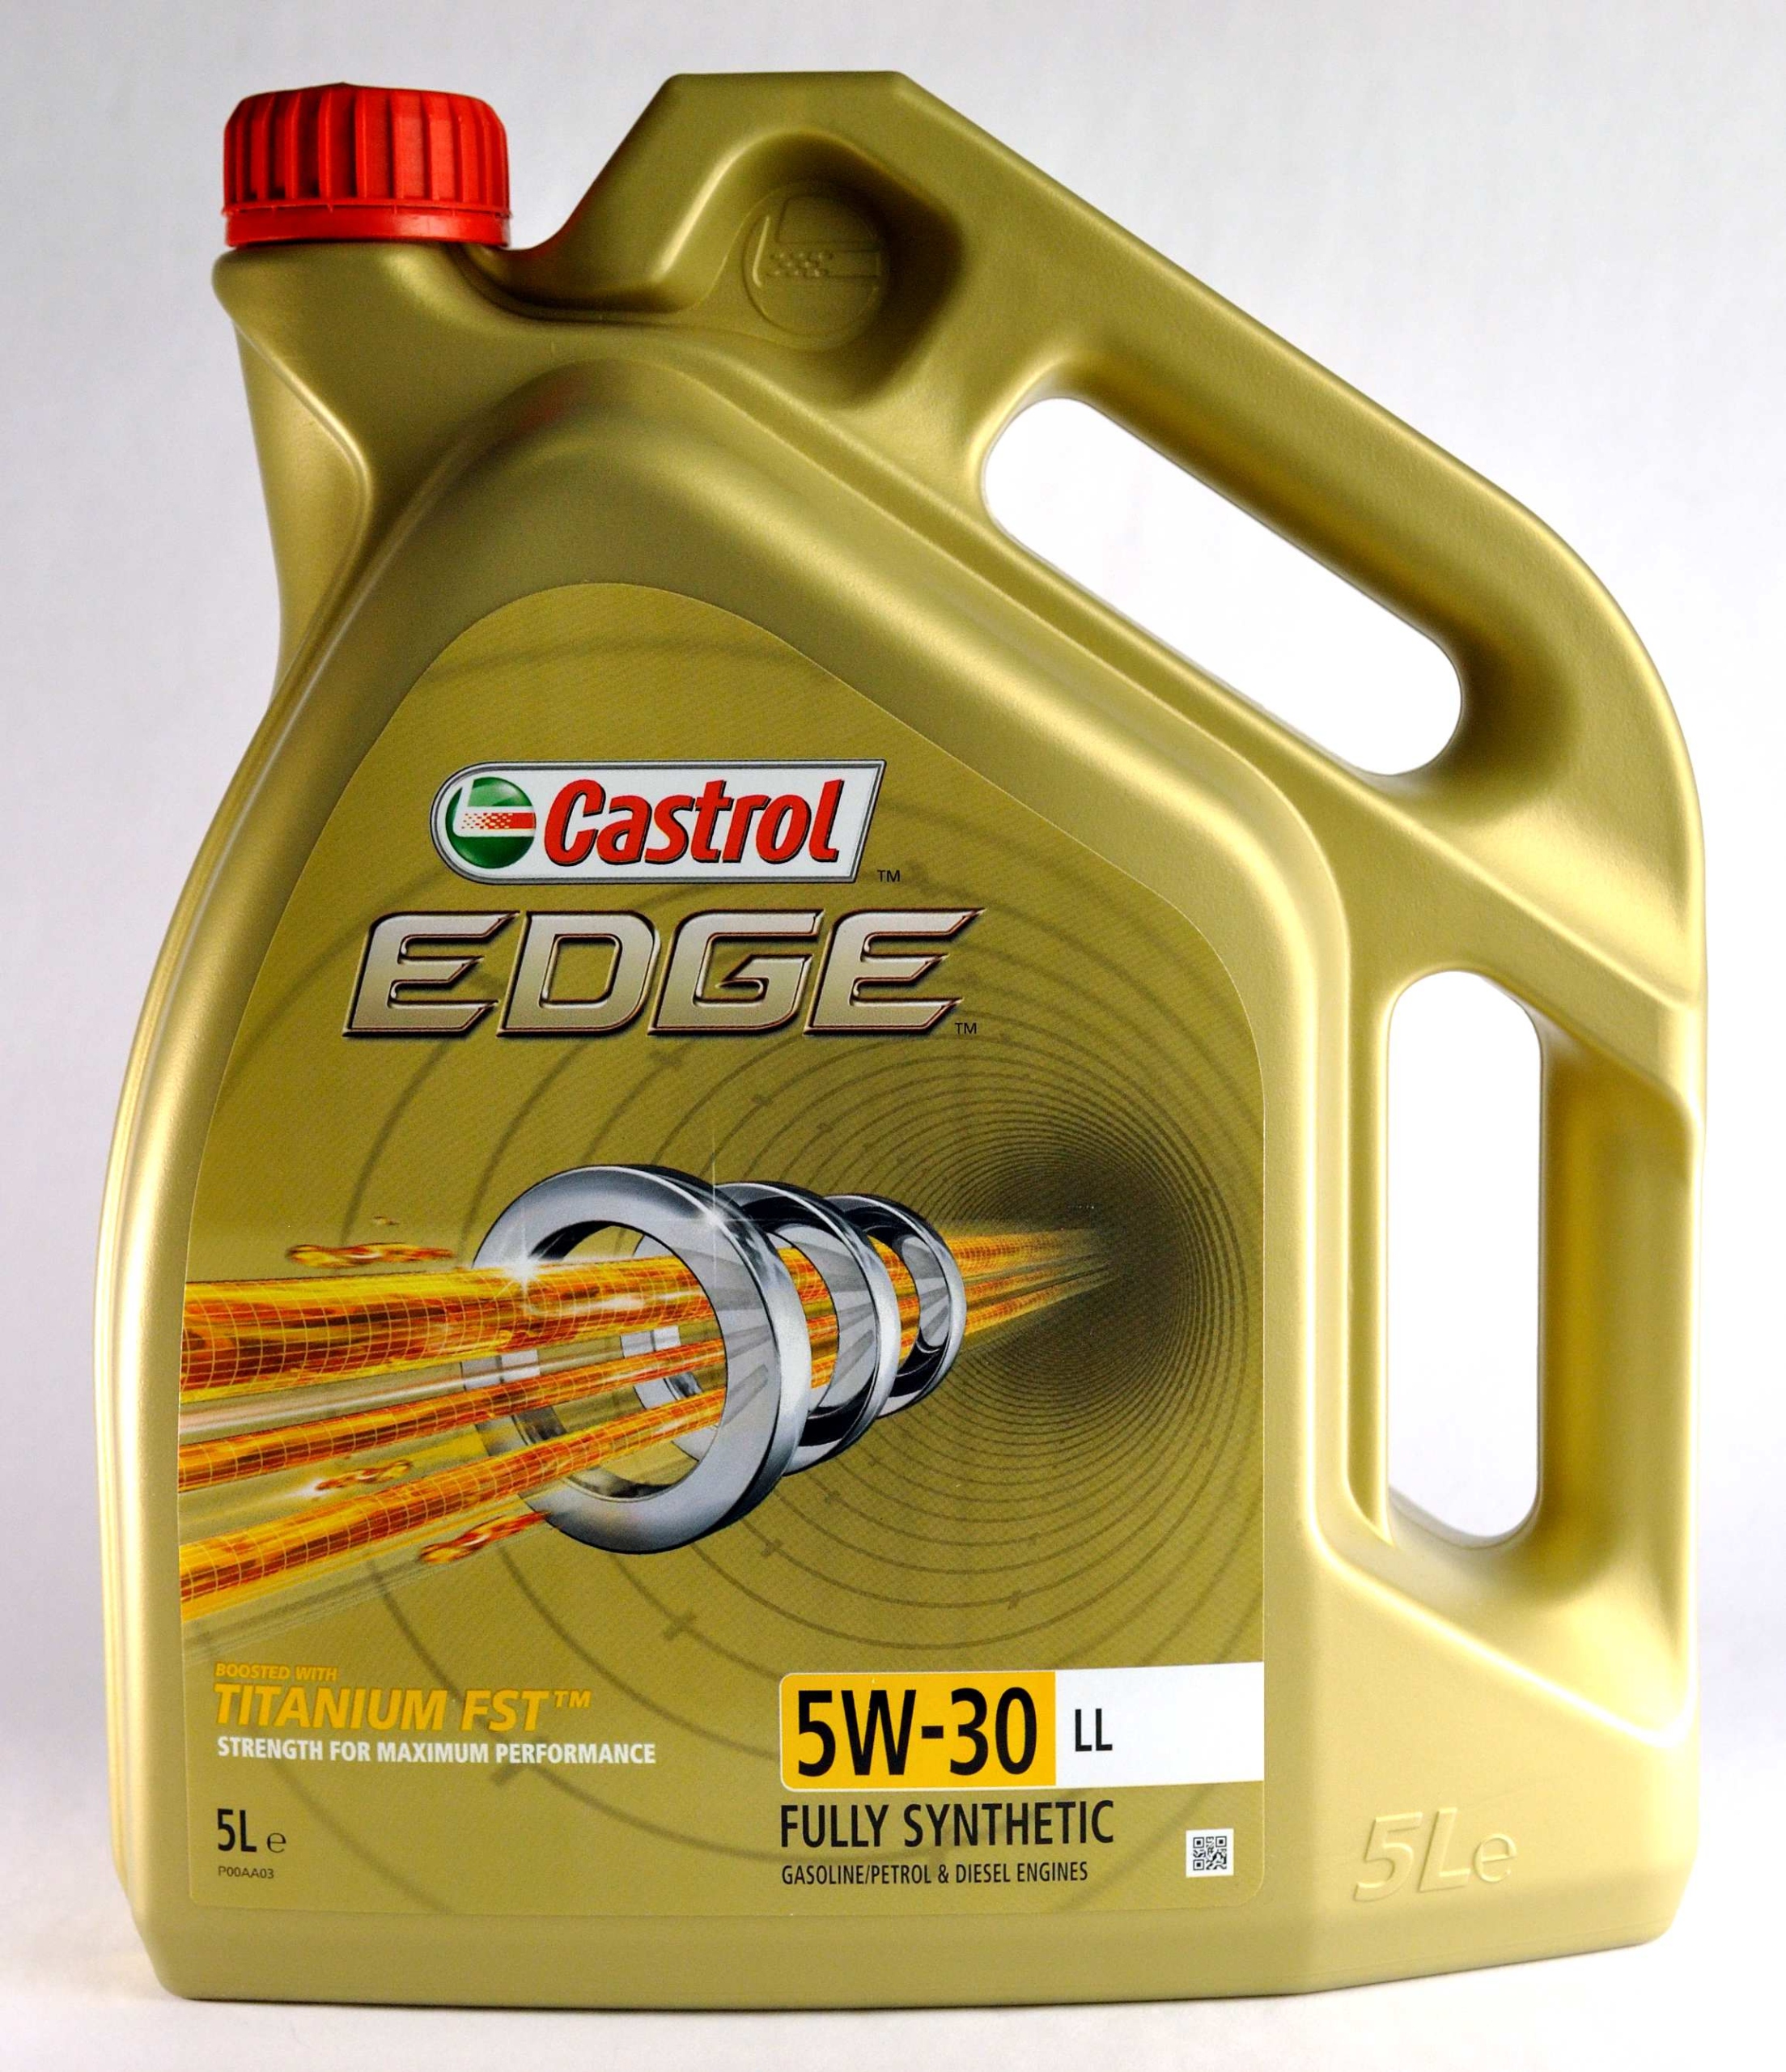 Engine Oils | What Oil for my Car? | Euro Car Parts